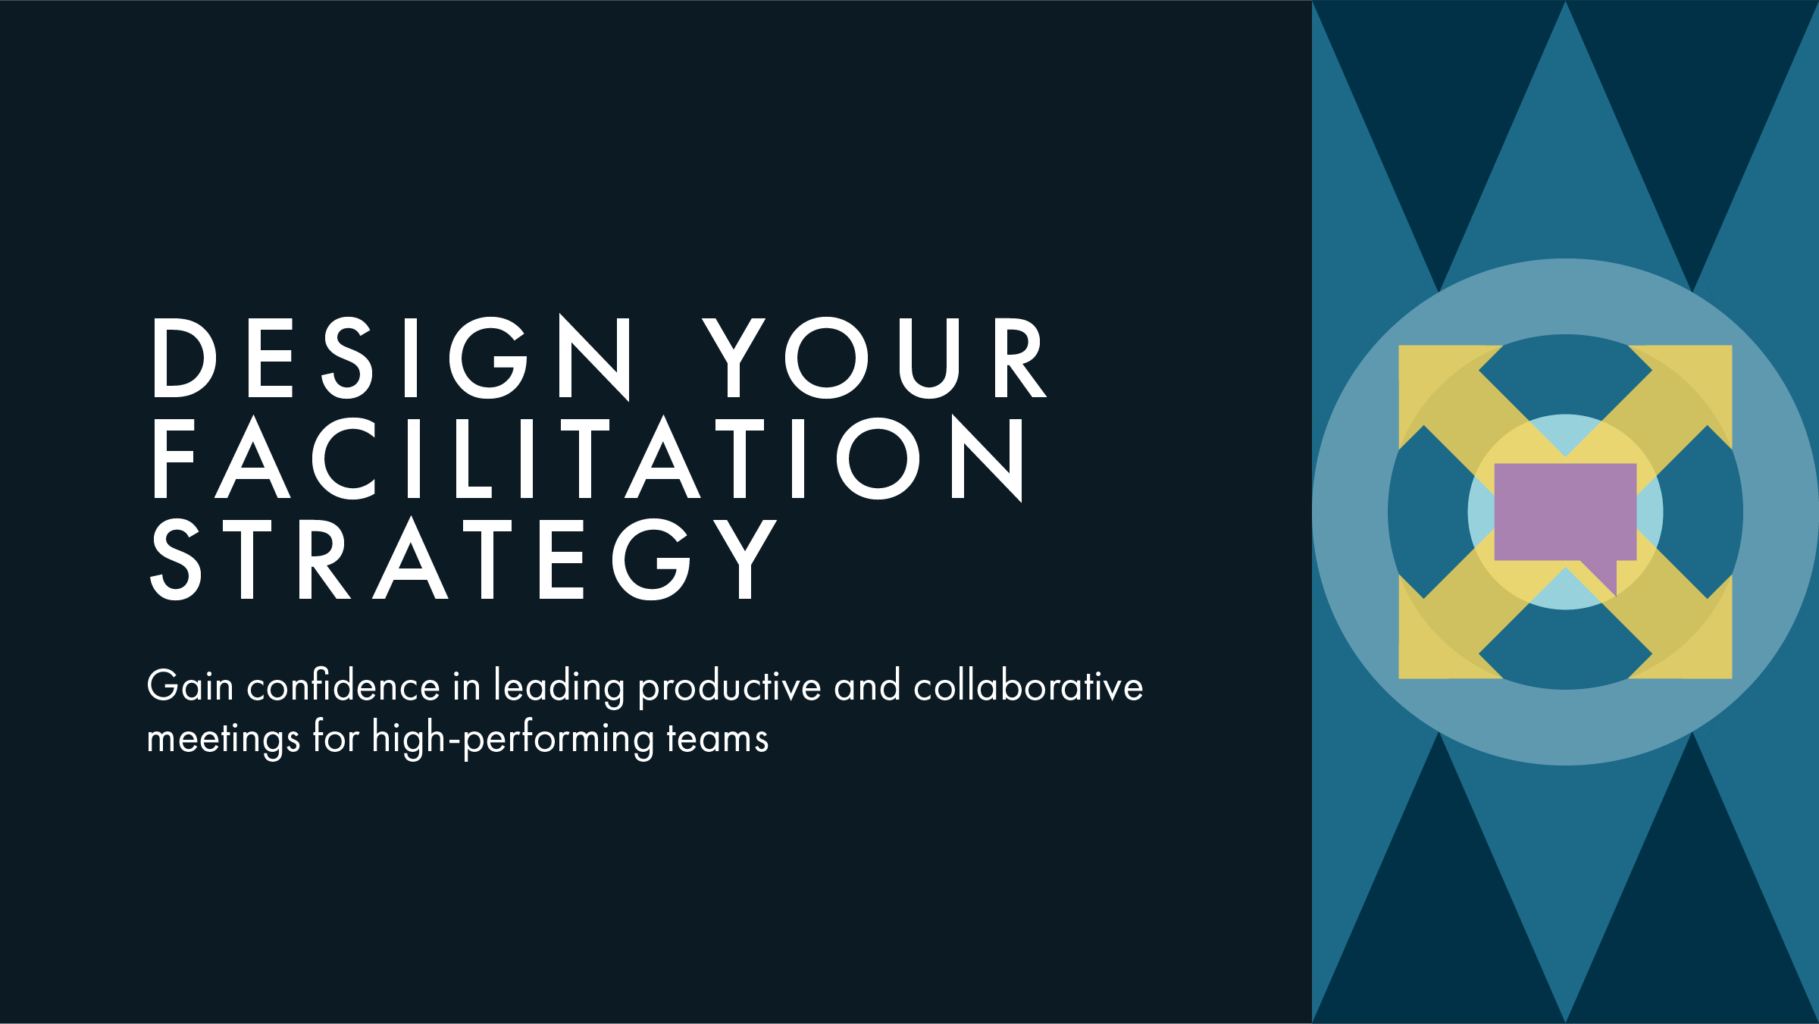 Text on the left reading "DESIGN YOUR FACILITATION STRATEGY. Gain confidence in leading productive and collaborative meetings for high-performing teams." On the right is the course badge for this course.